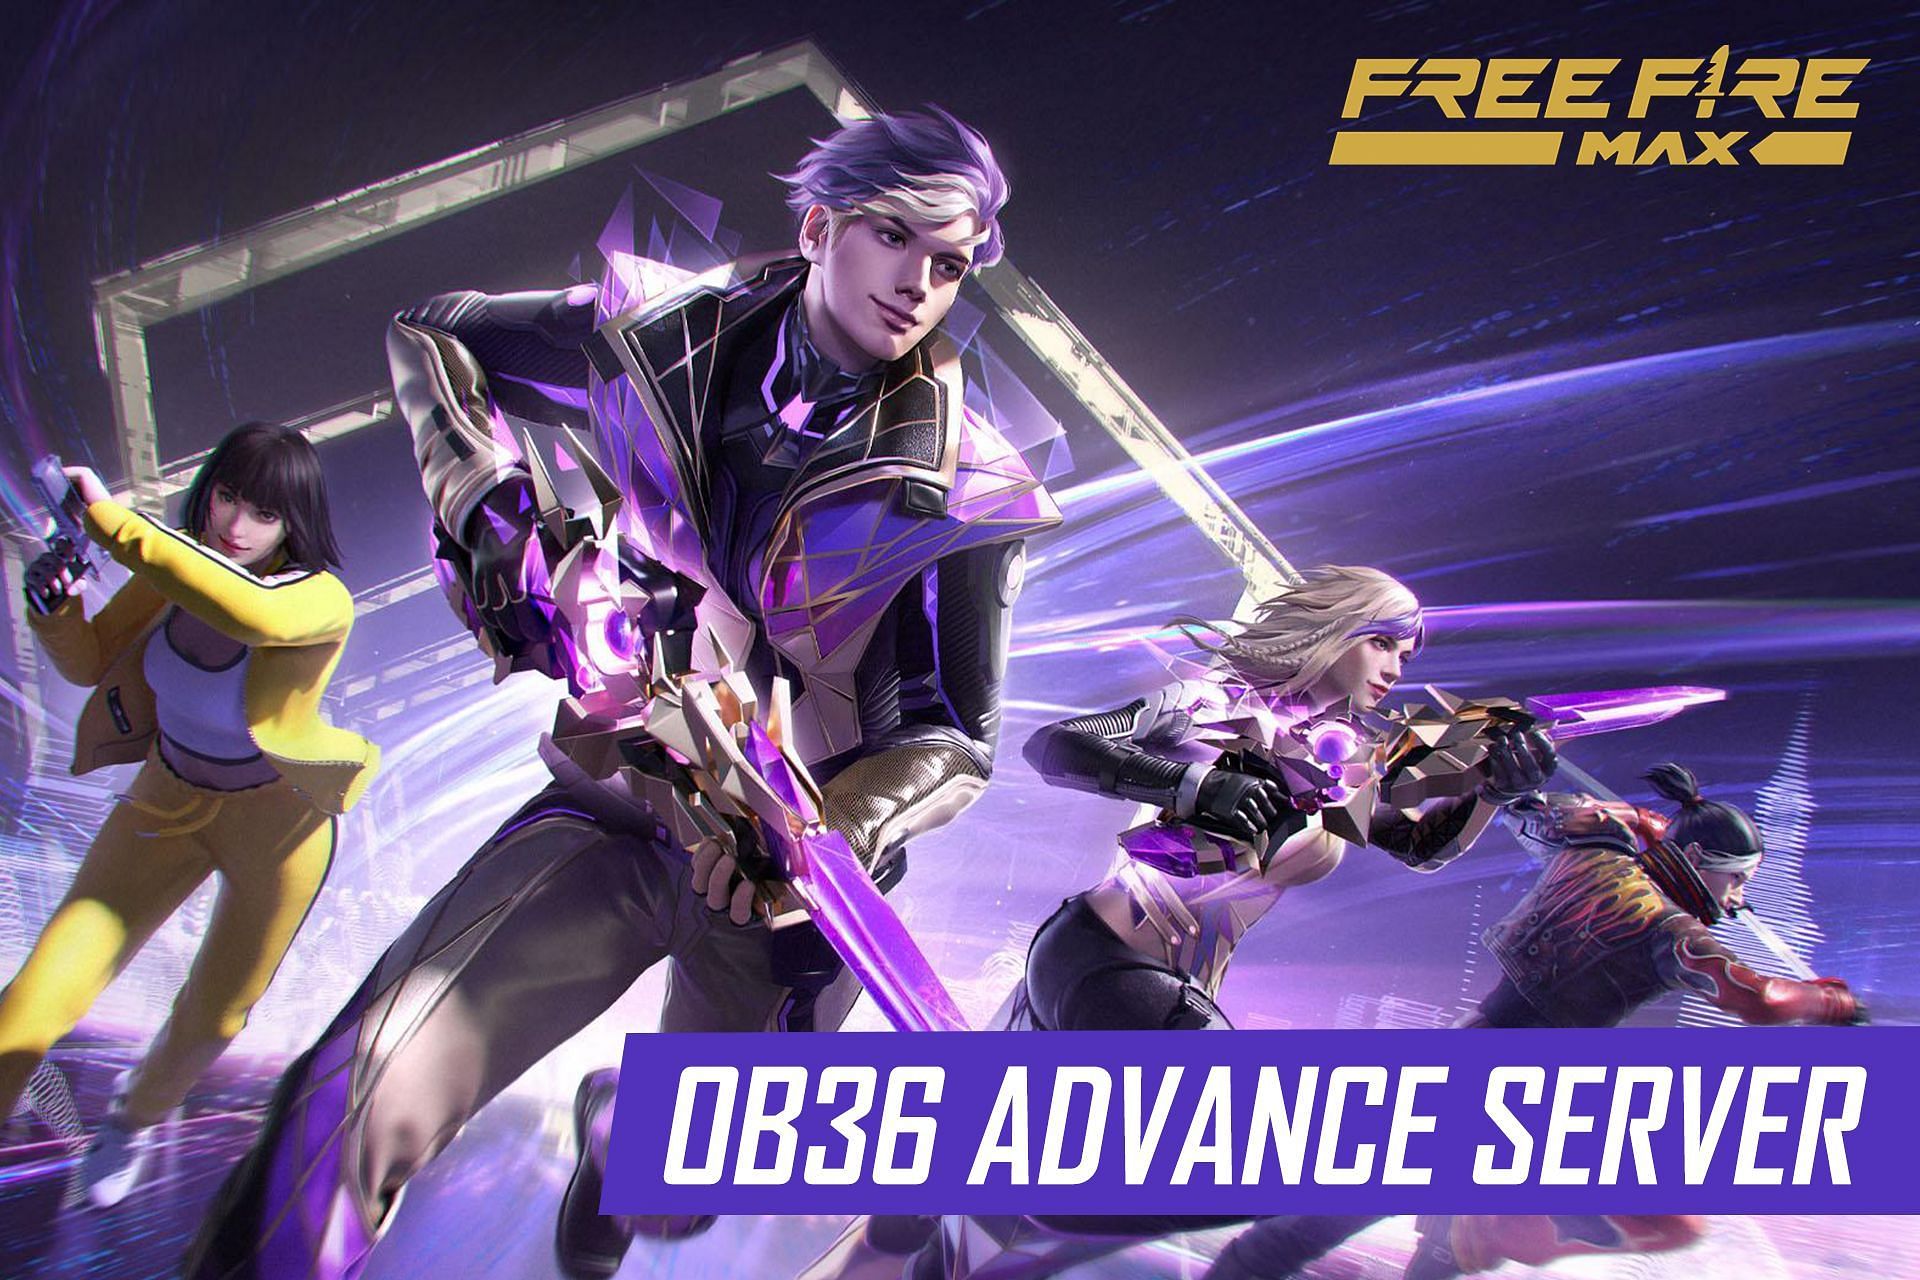 A step-by-step guide to get the Activation Code for Free Fire MAX OB36 Advance Server (Image via Sportskeeda)